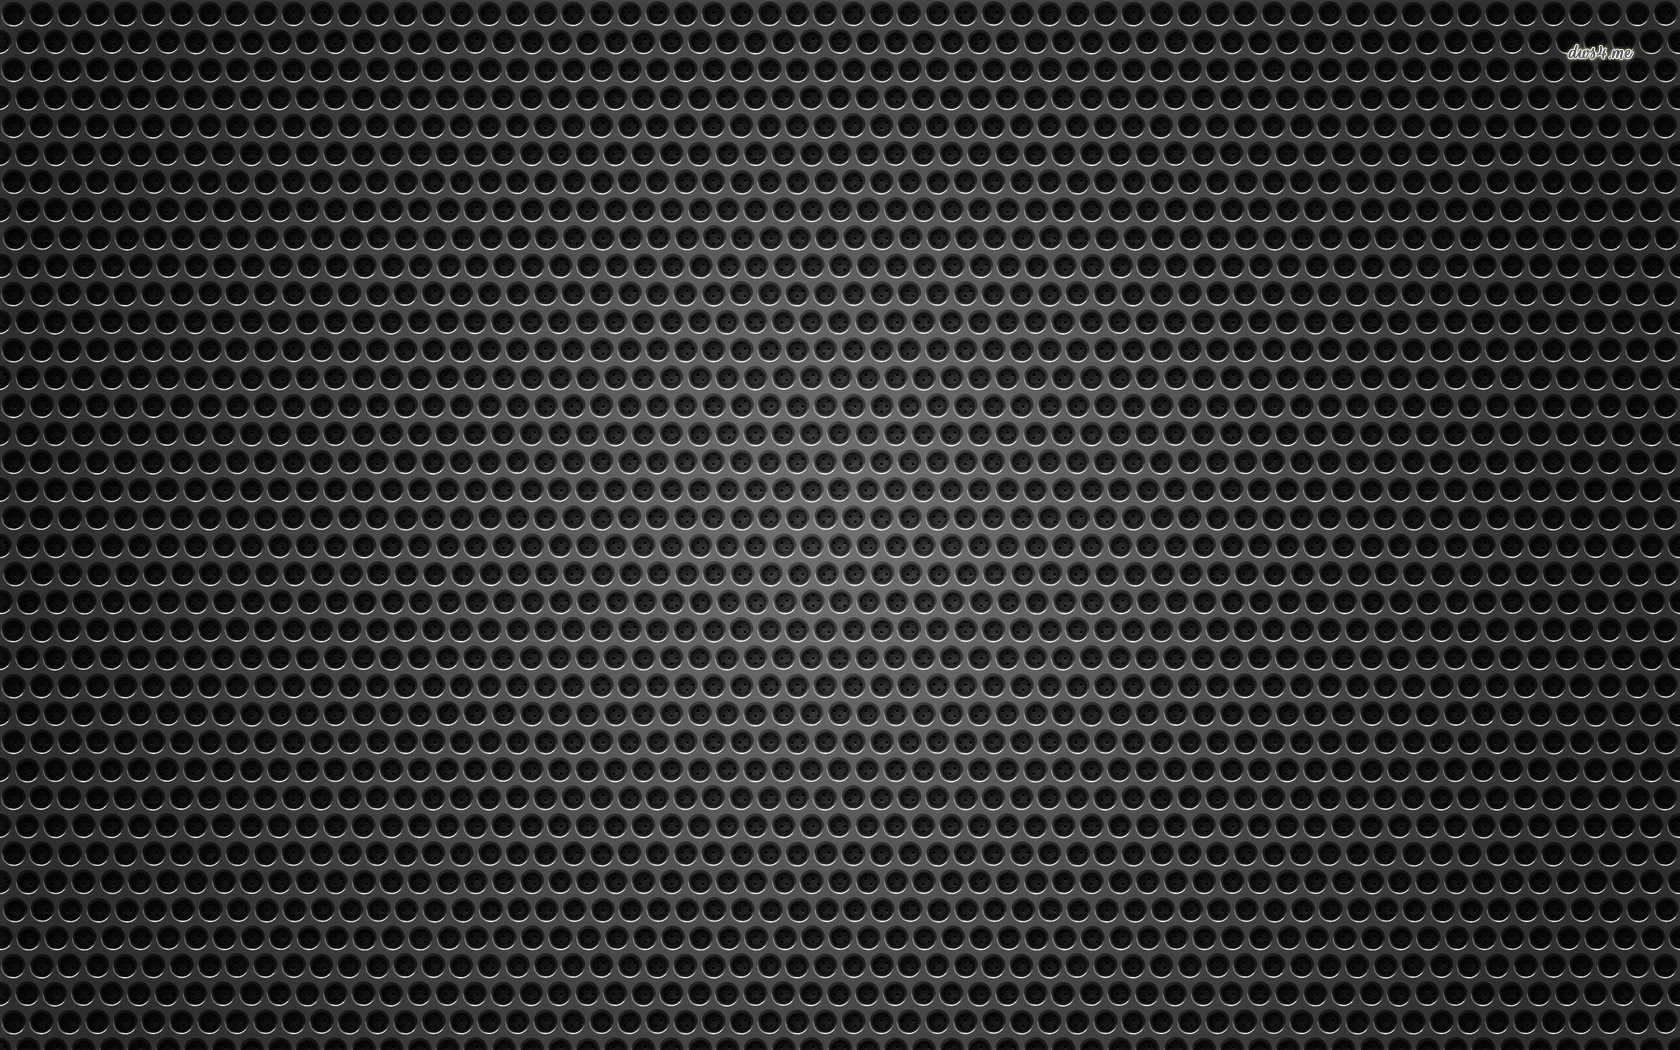 Metallic circles with black dots inside wallpaper   Abstract